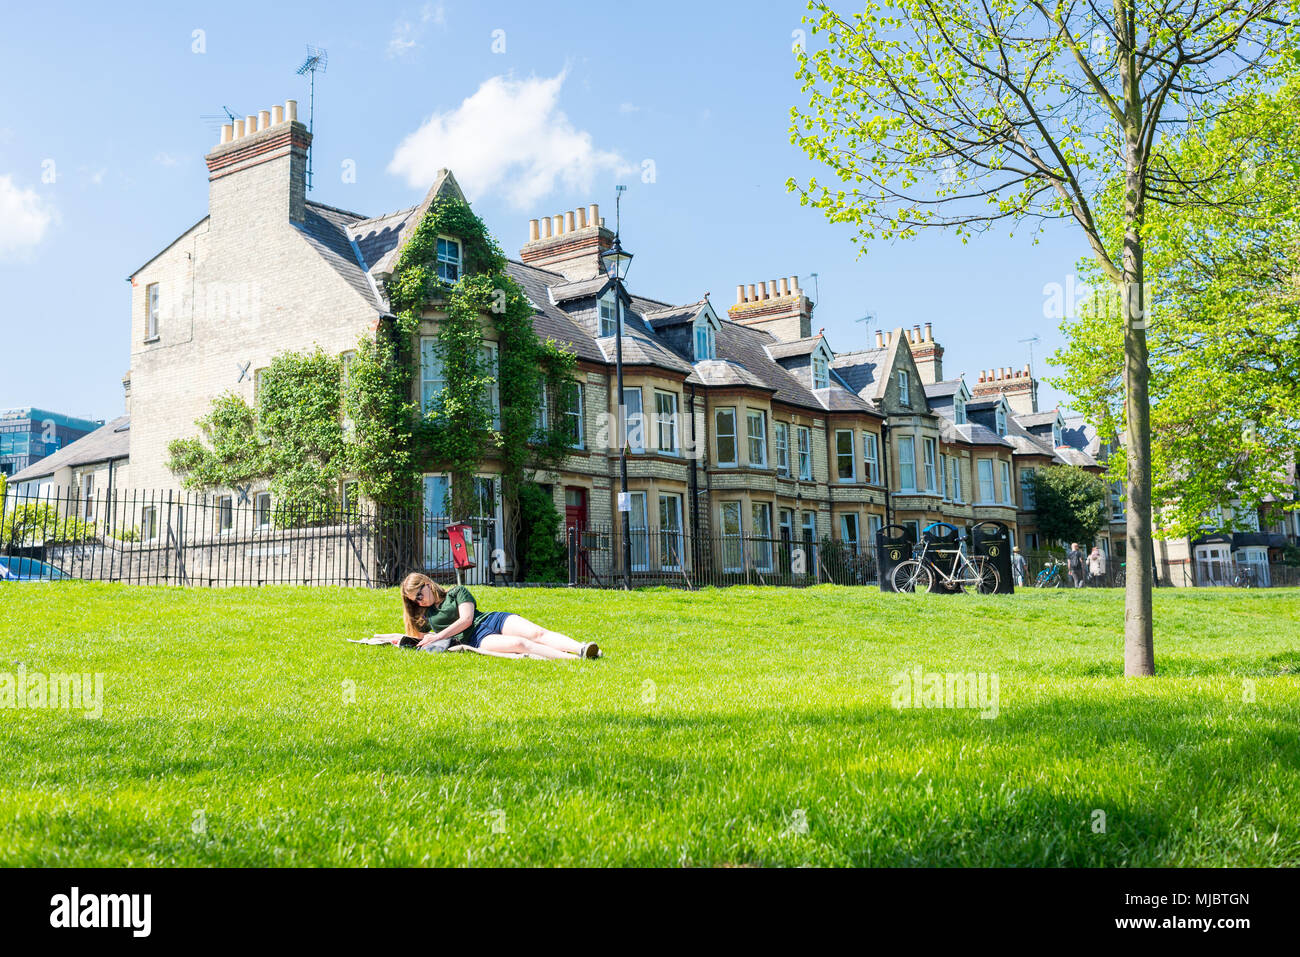 Young woman student reading a book lying on the grass enjoying the warm spring weather in Jesus Green public park, Cambridge, UK. Stock Photo